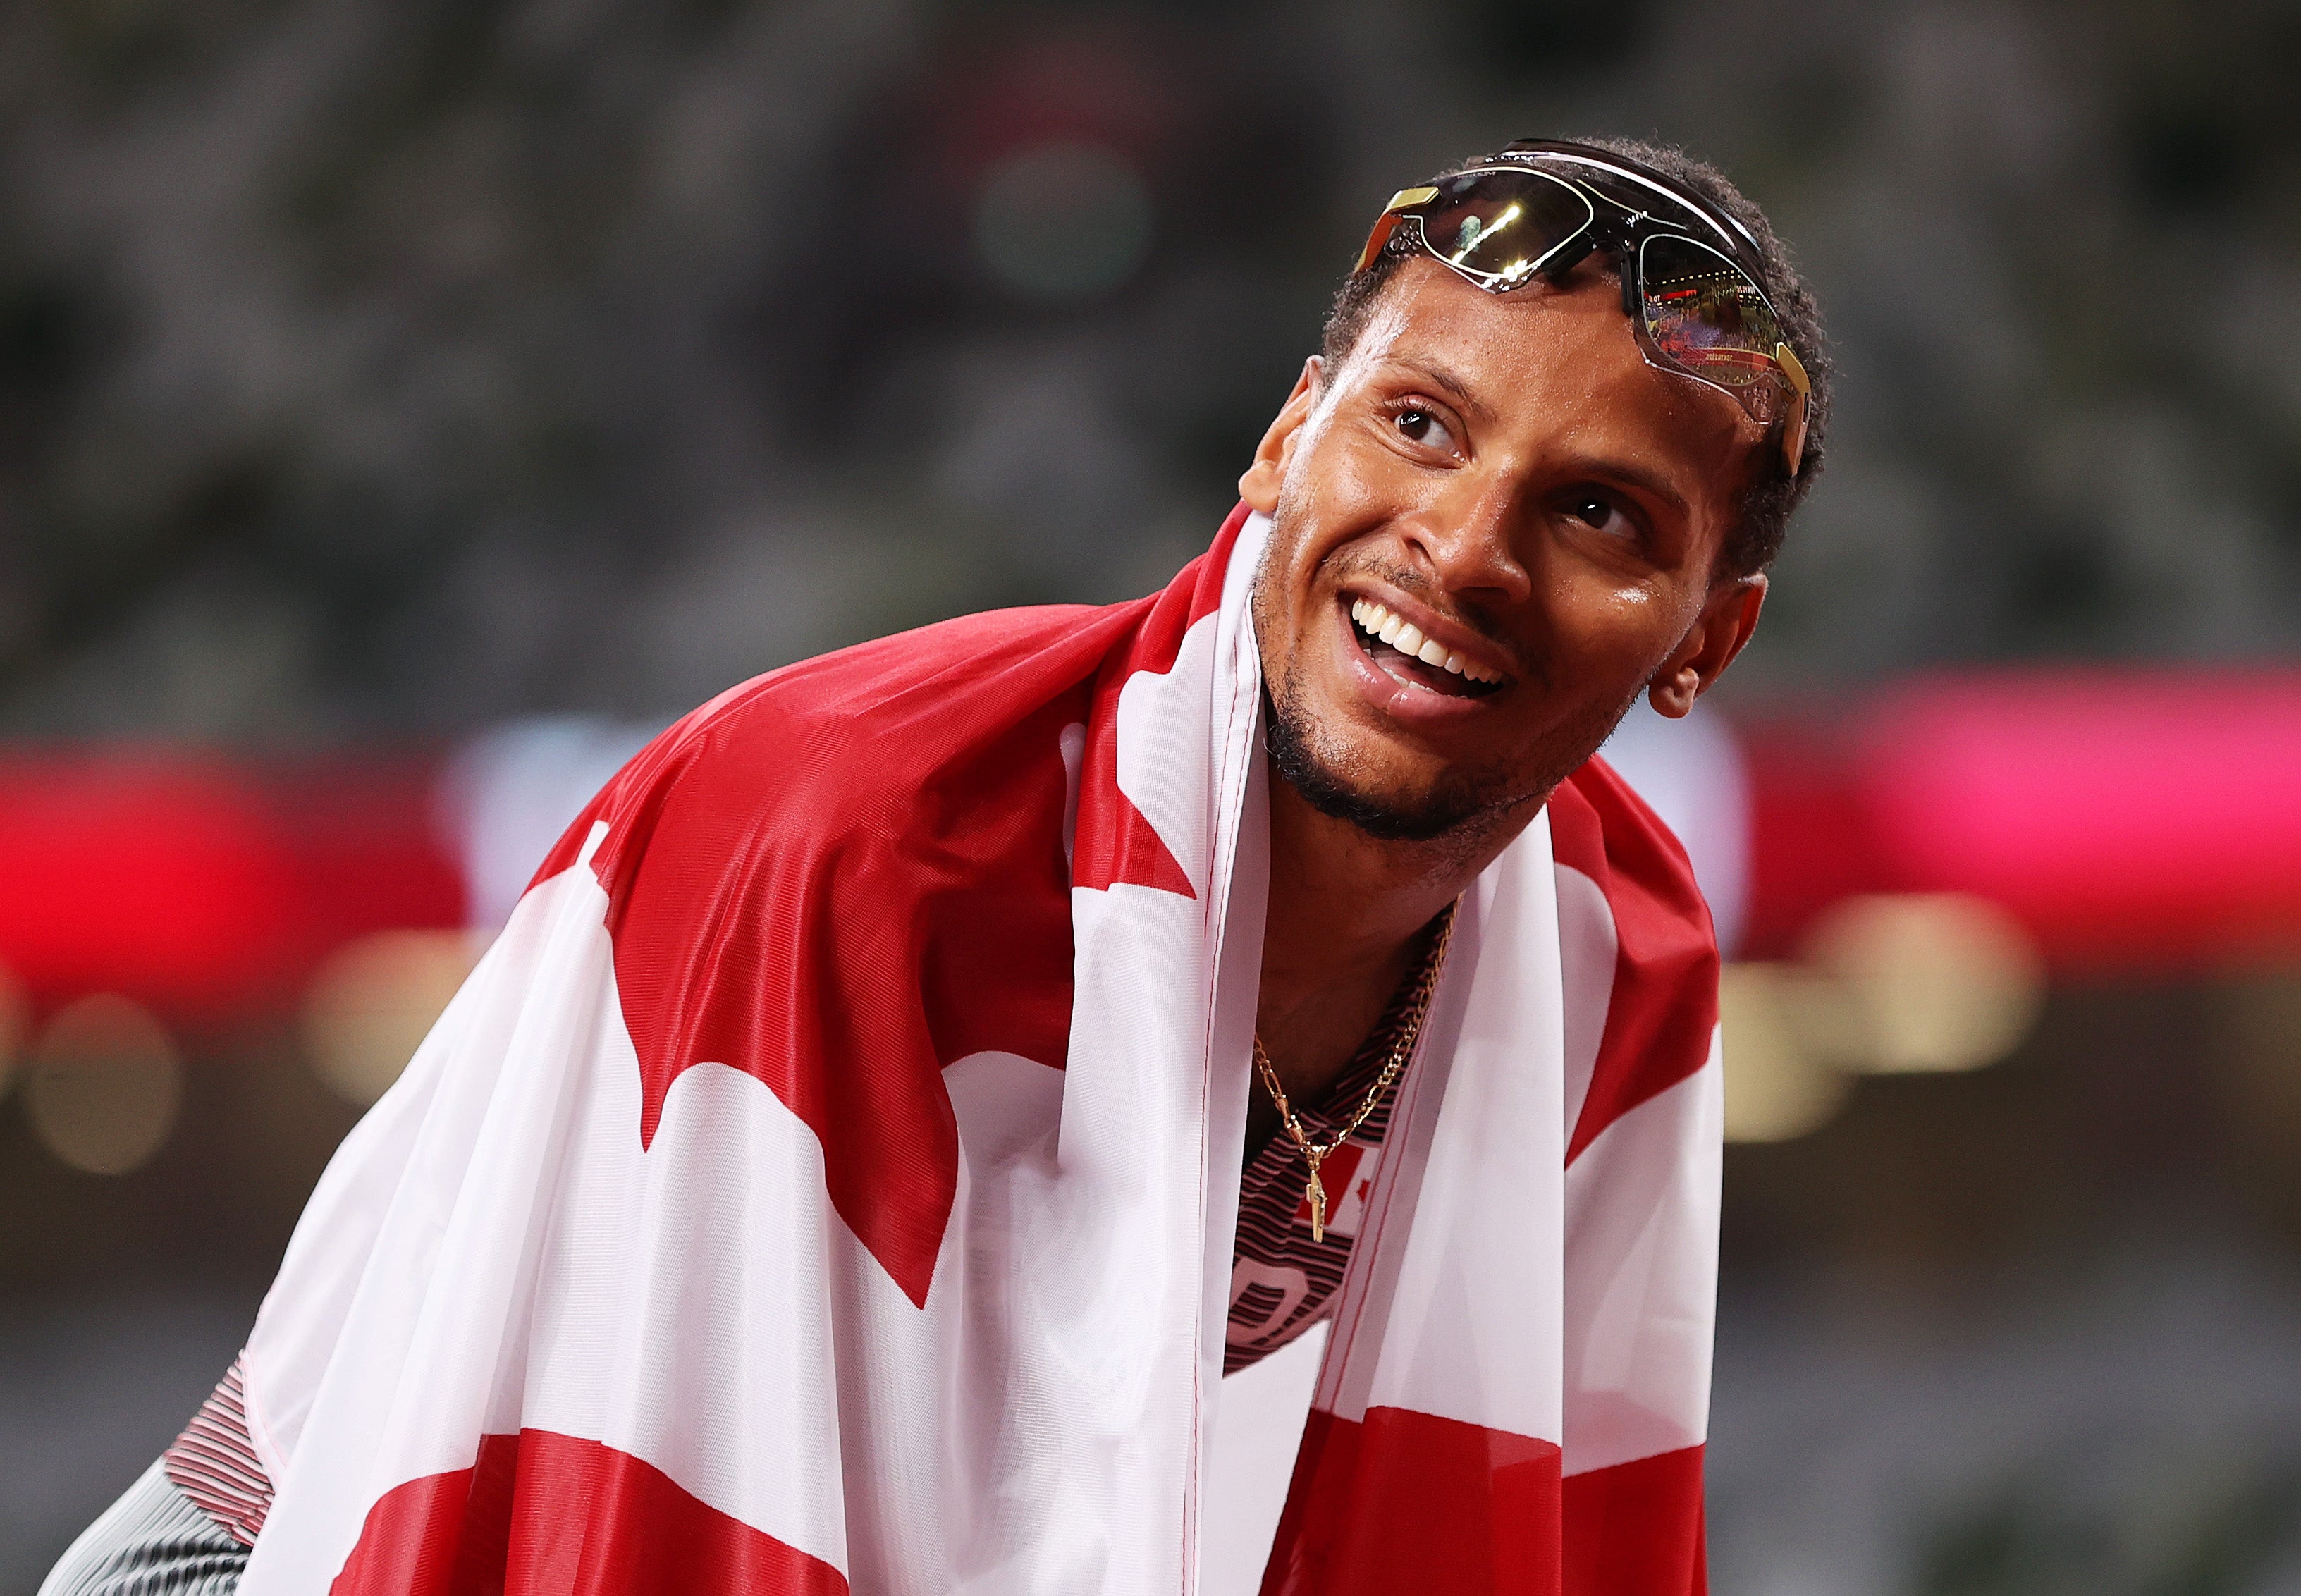 Andre De Grasse of Team Canada celebrates after winning the gold medal